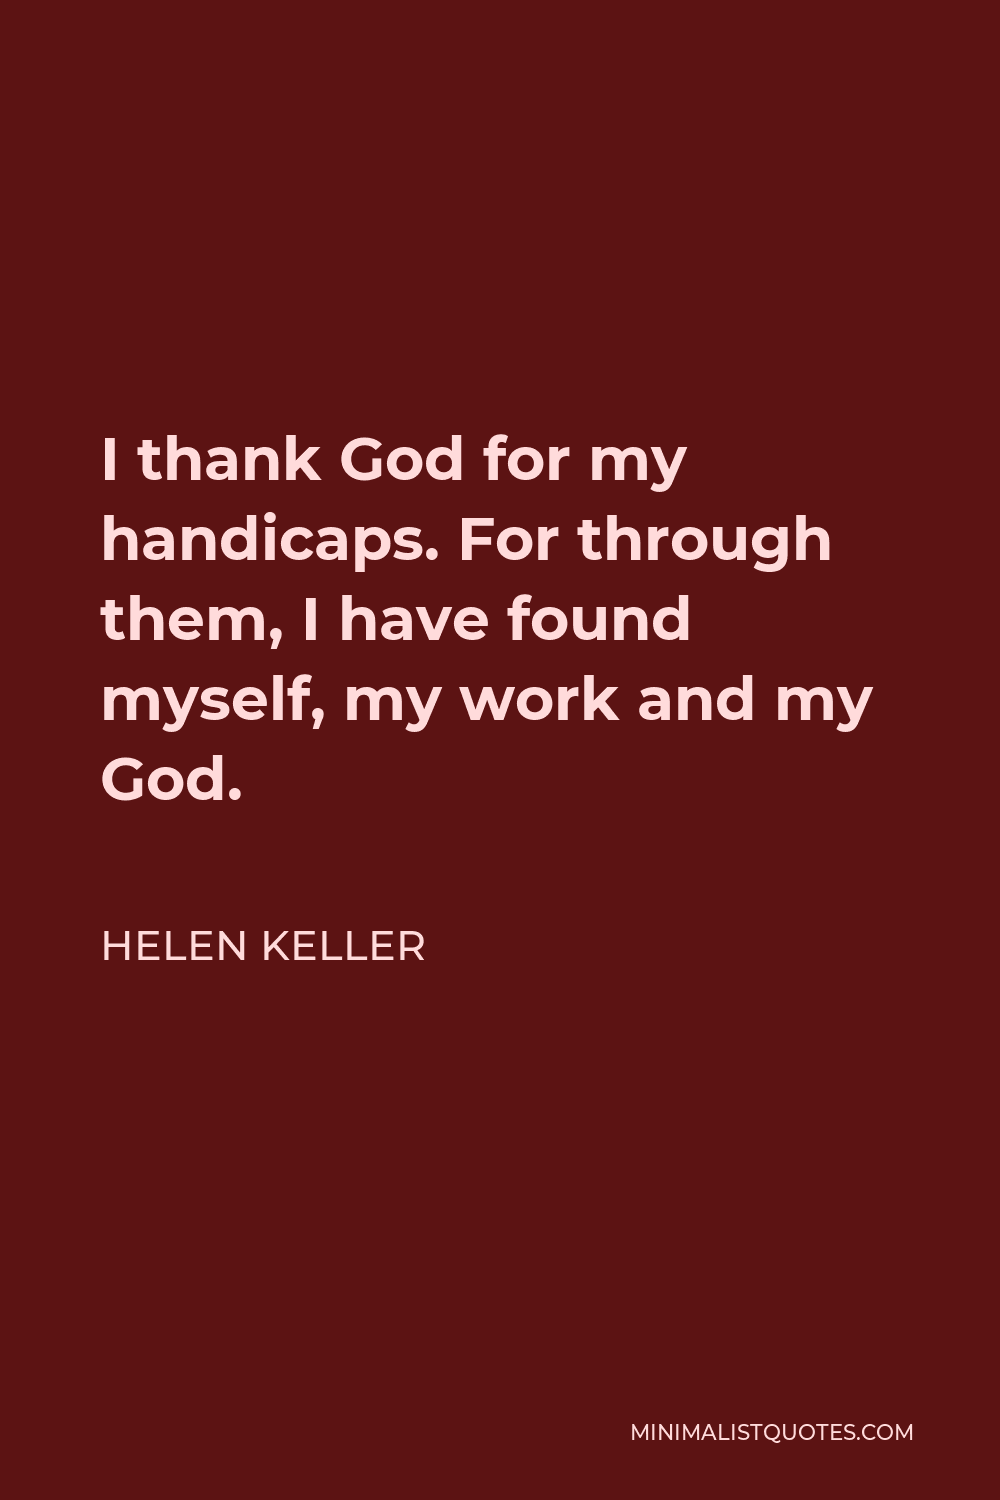 Helen Keller Quote - I thank God for my handicaps. For through them, I have found myself, my work and my God.